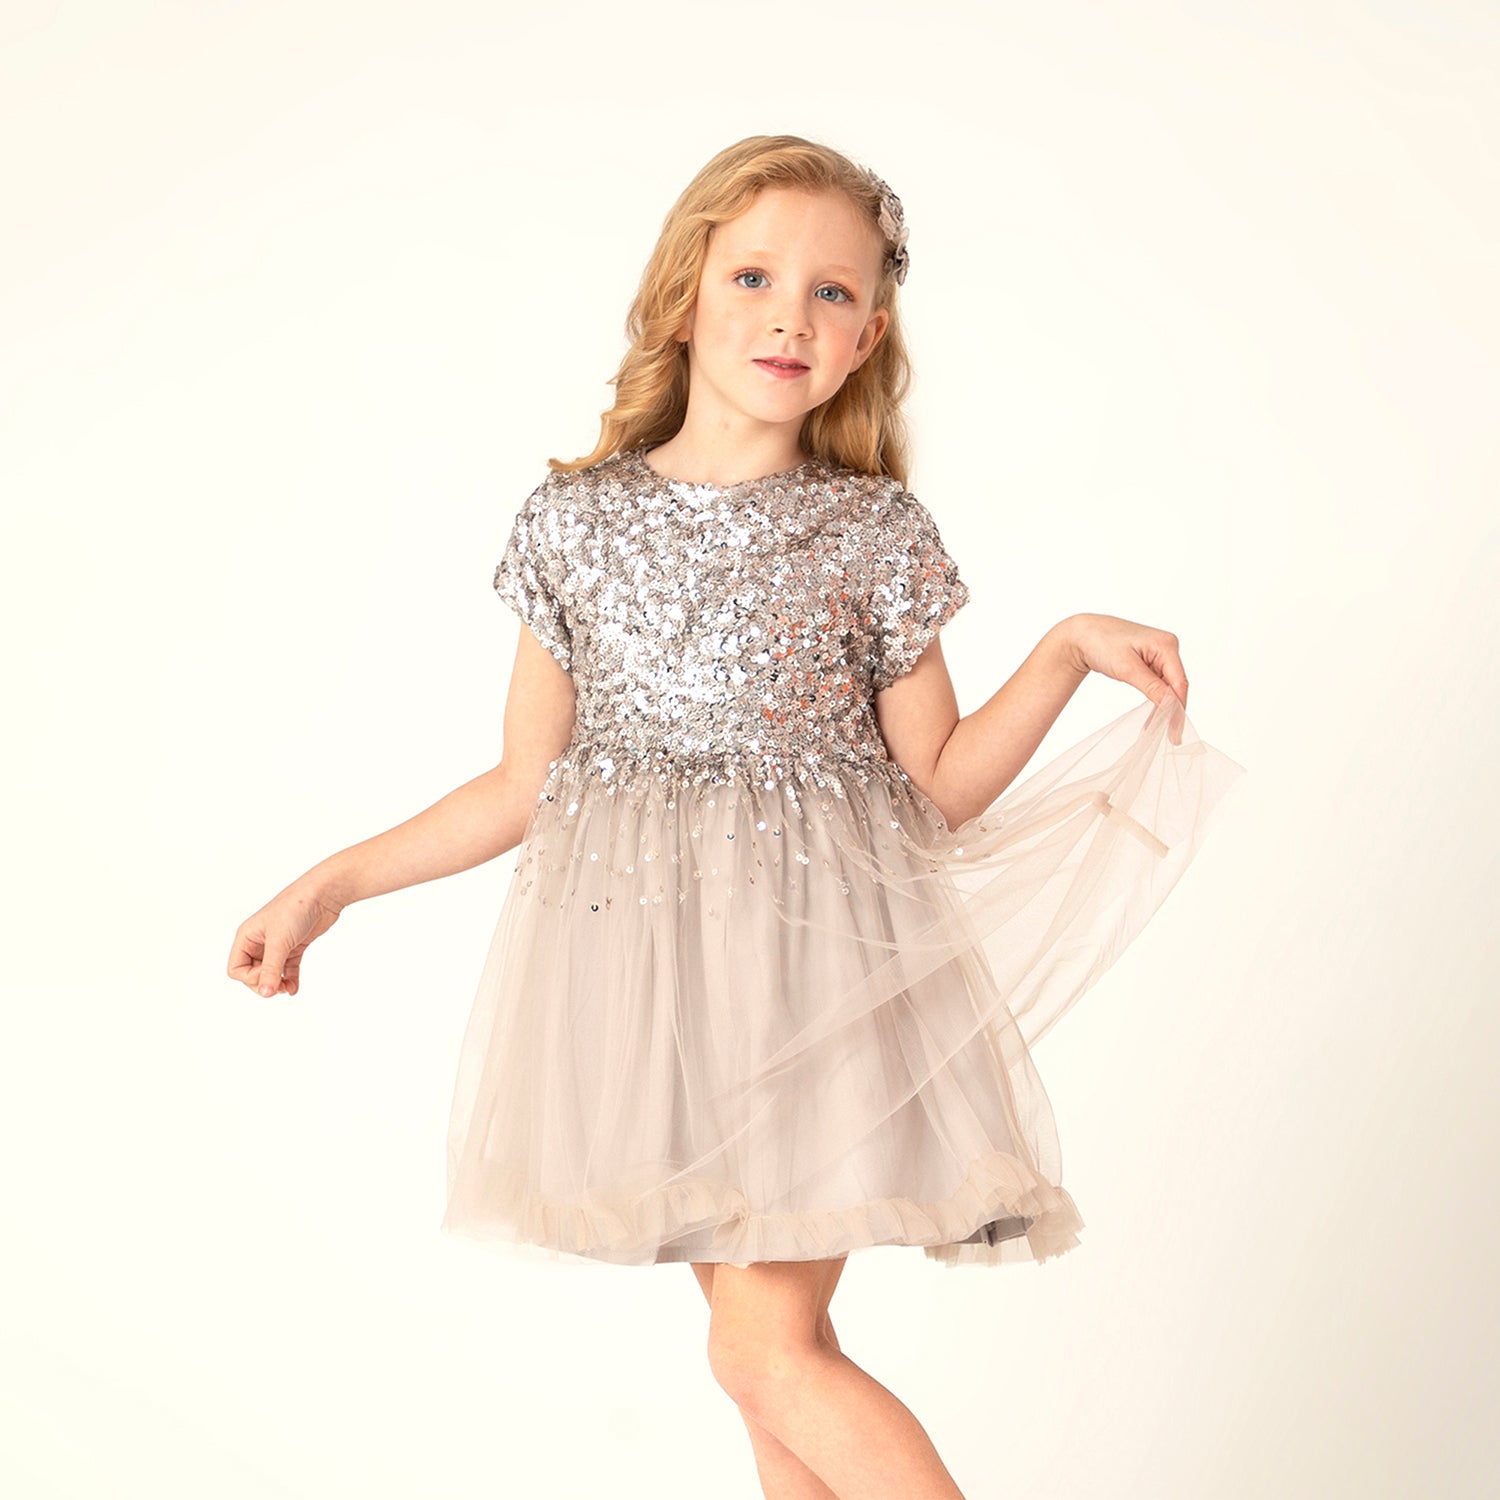 Shining Shelby Dress with Bow and Clip